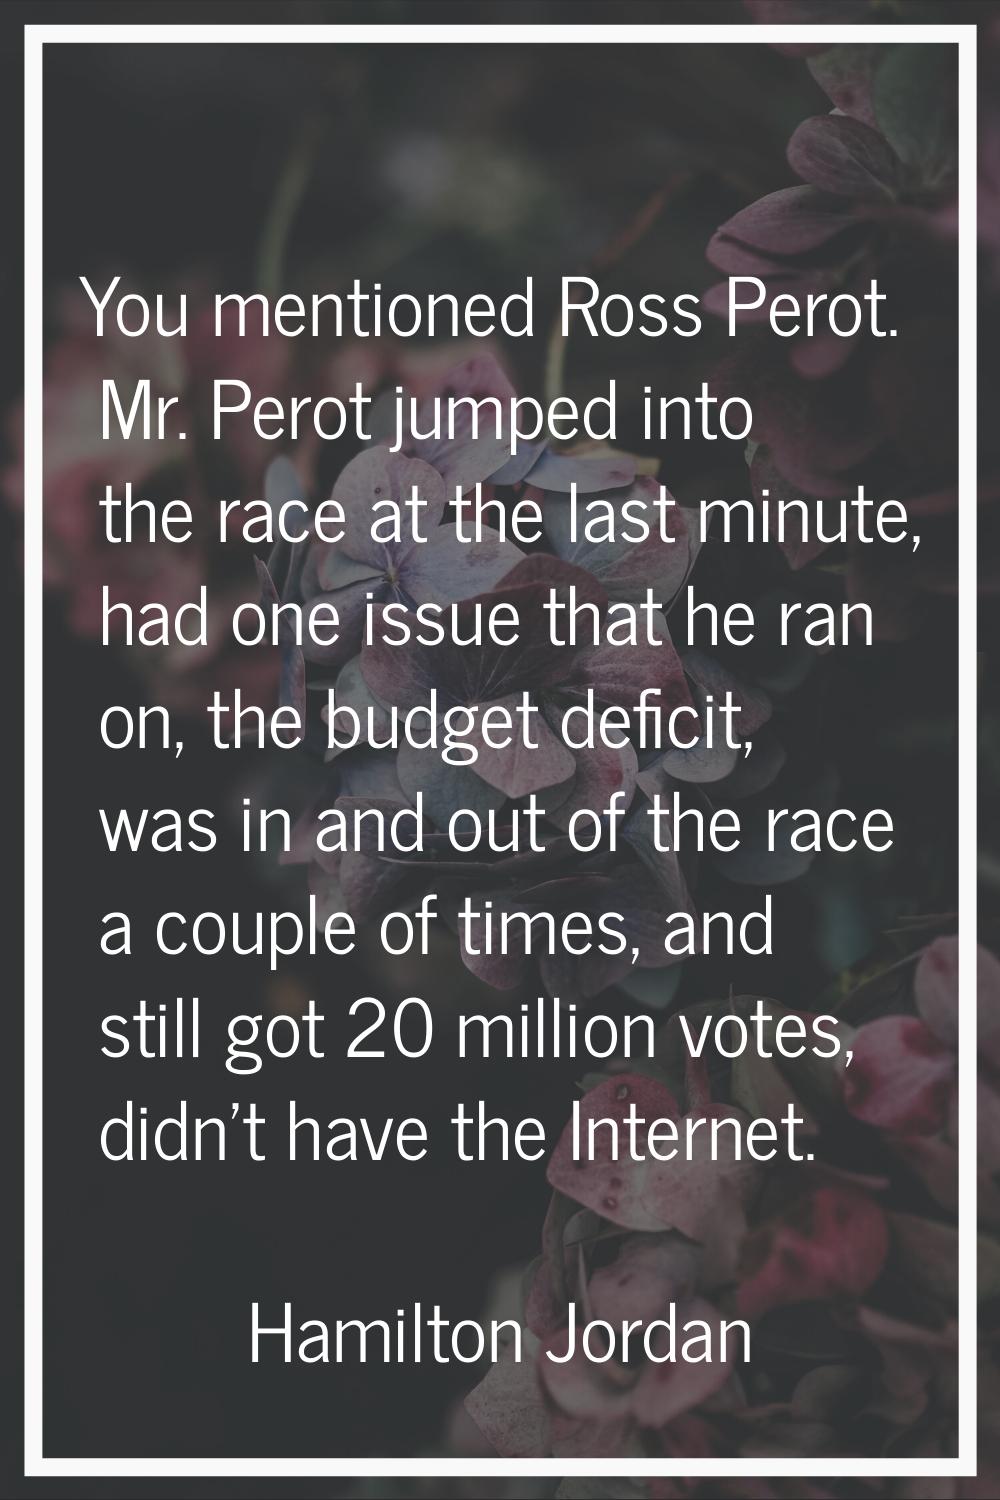 You mentioned Ross Perot. Mr. Perot jumped into the race at the last minute, had one issue that he 